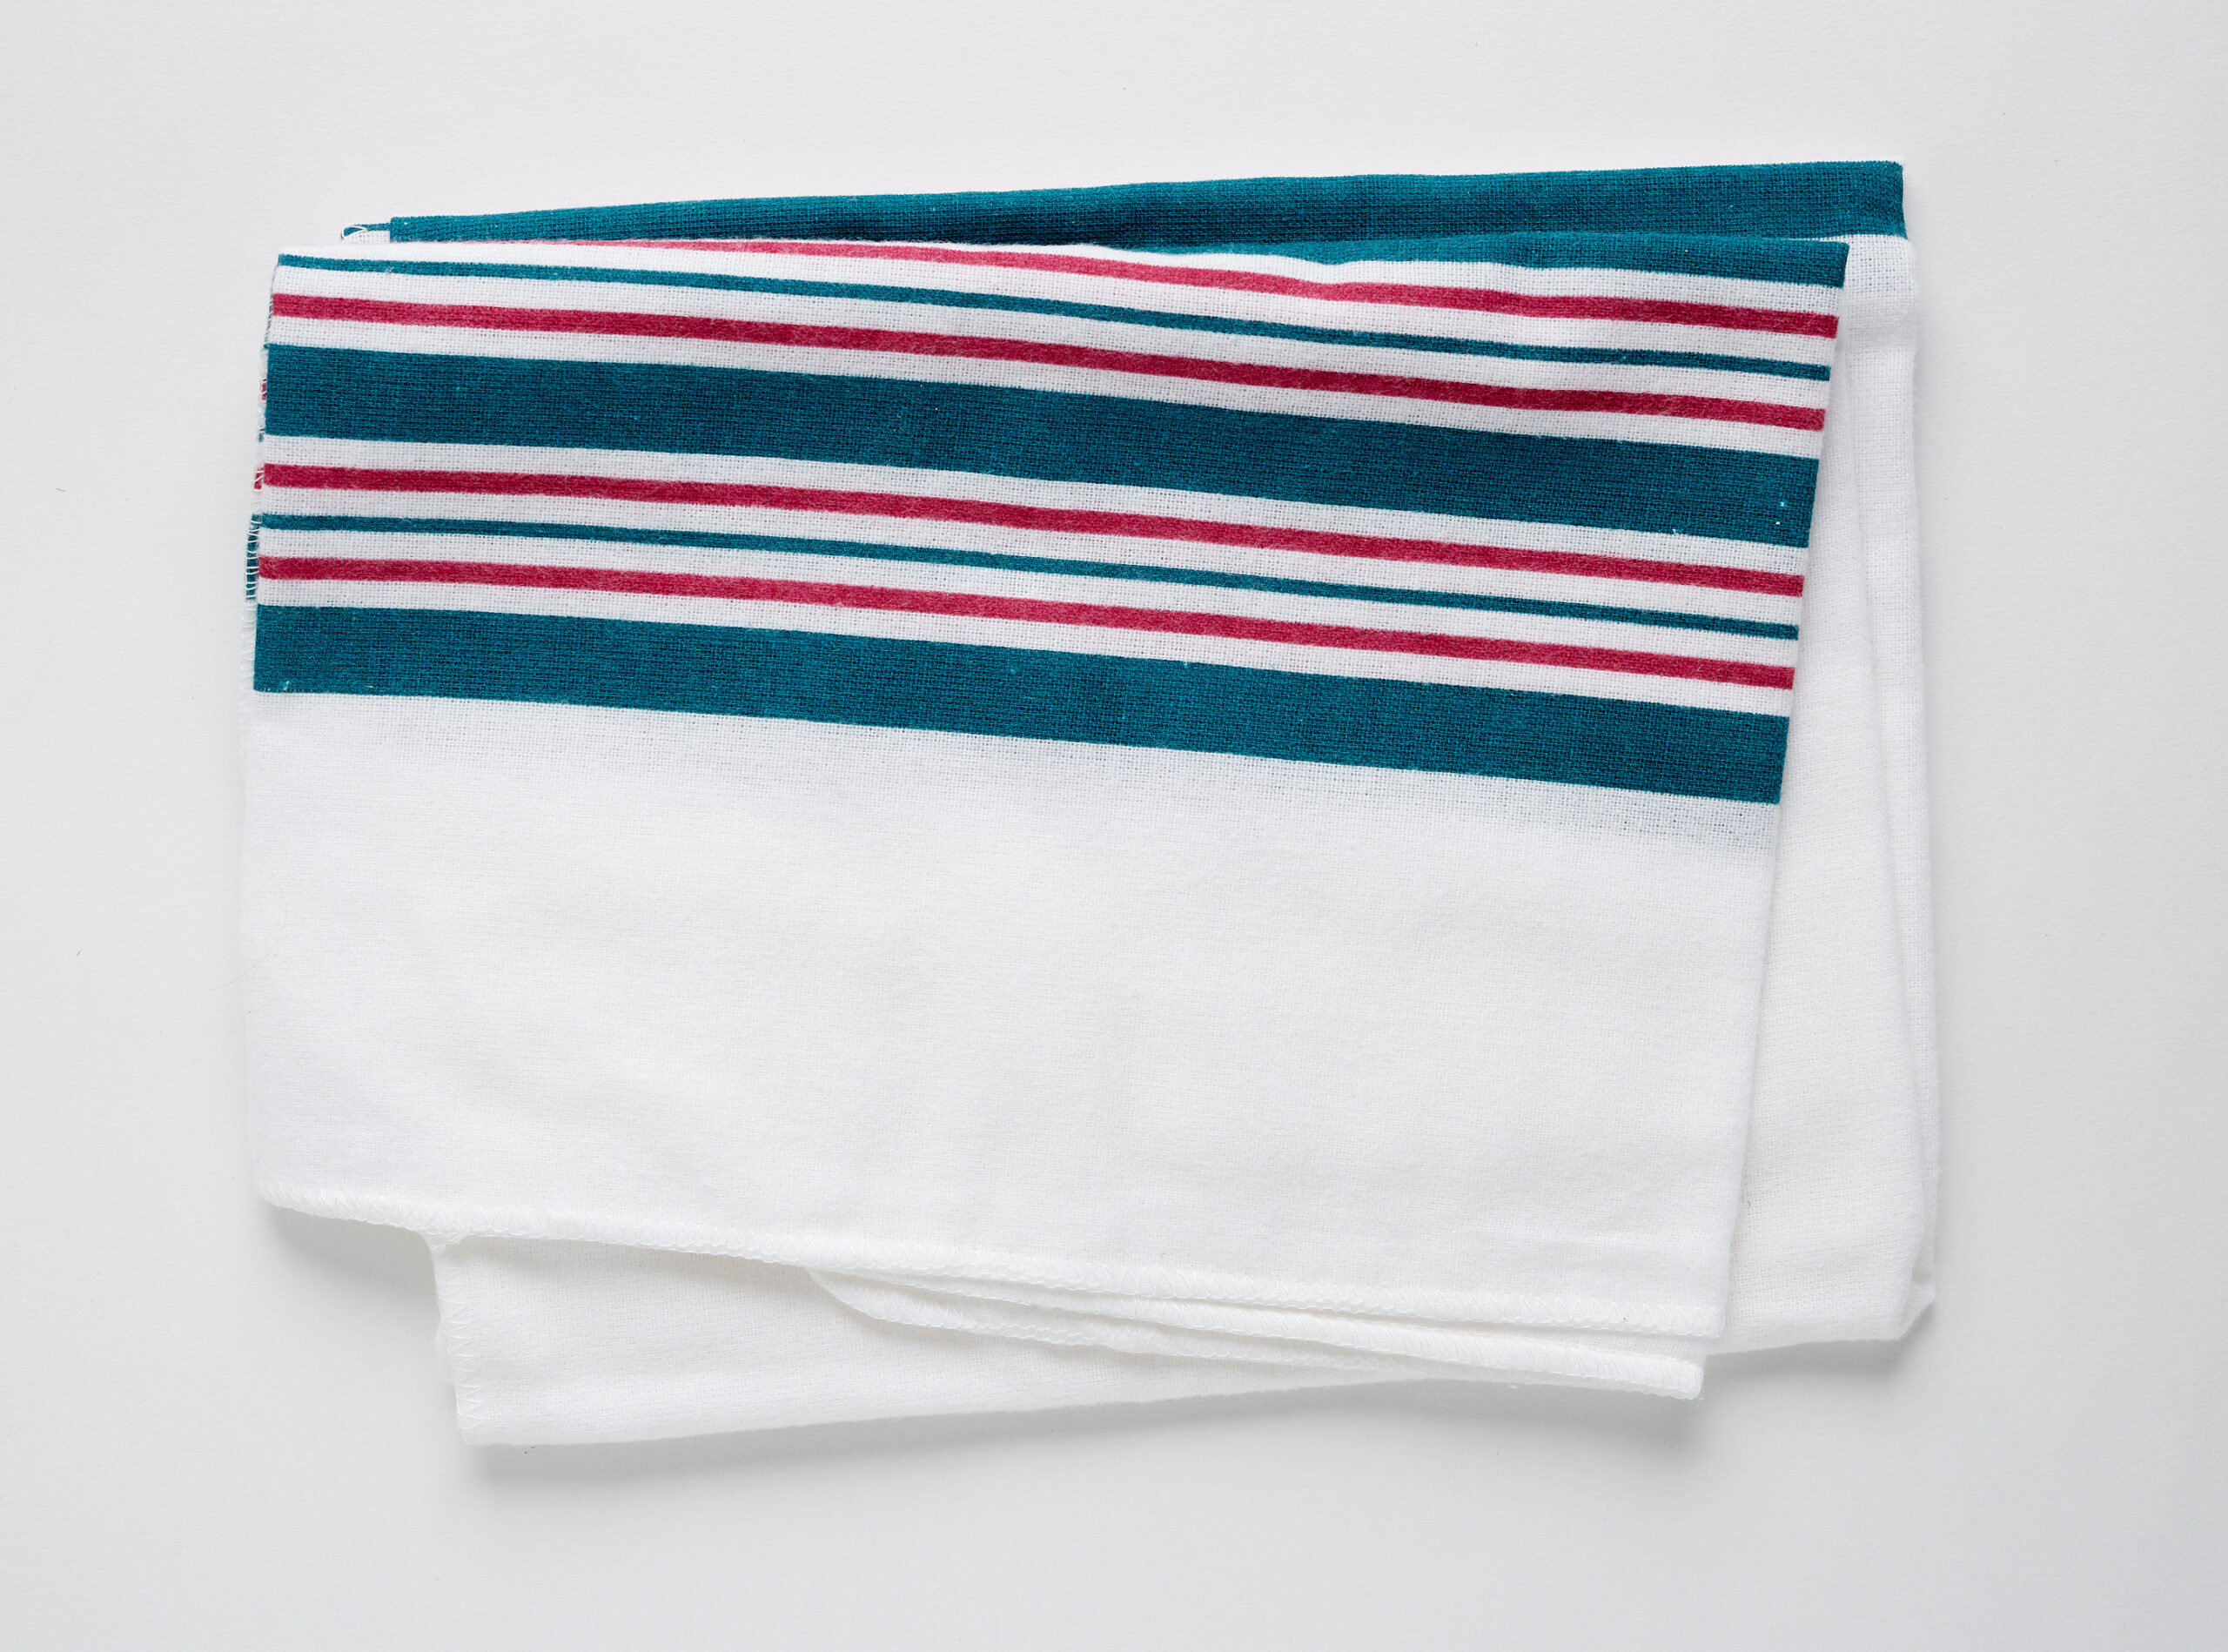 Image of a whote and blue striped infant hospital blanket on a white background